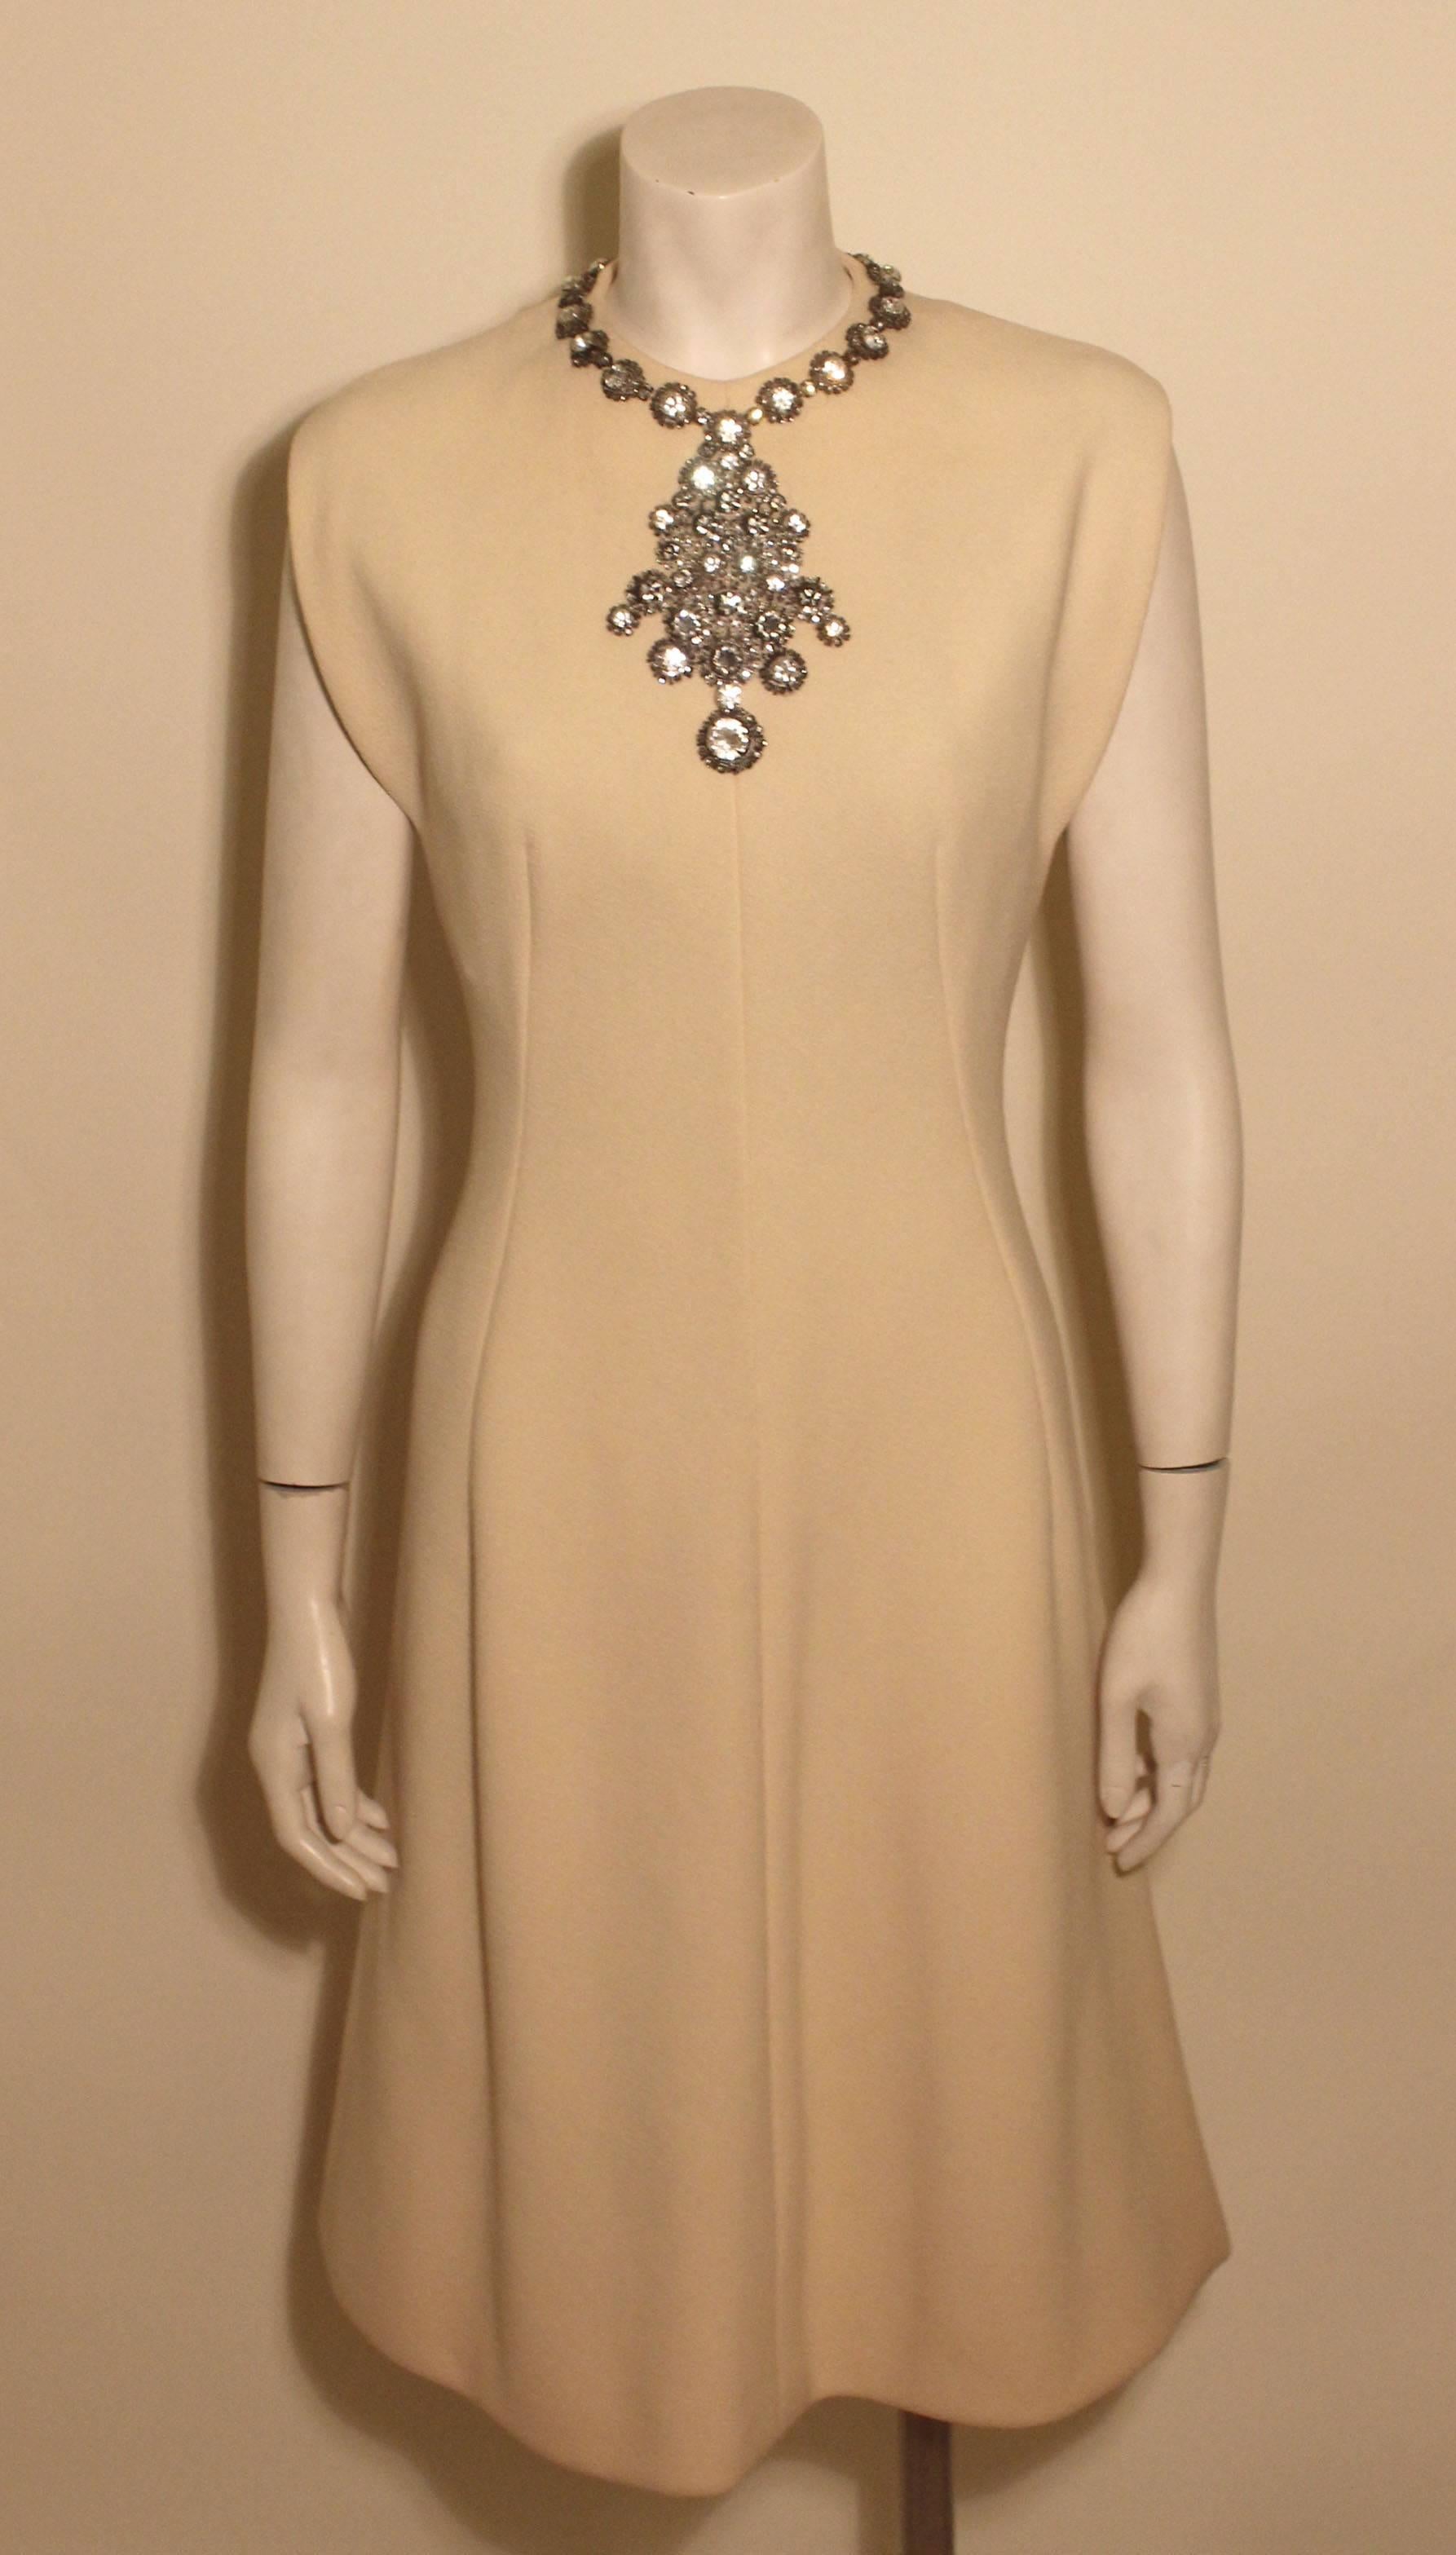 Made of a fine cashmere wool, this Trigere dress is extravagant. It is beautifully executed with a rhinestone necklace attached to the front and neckline of the dress. 